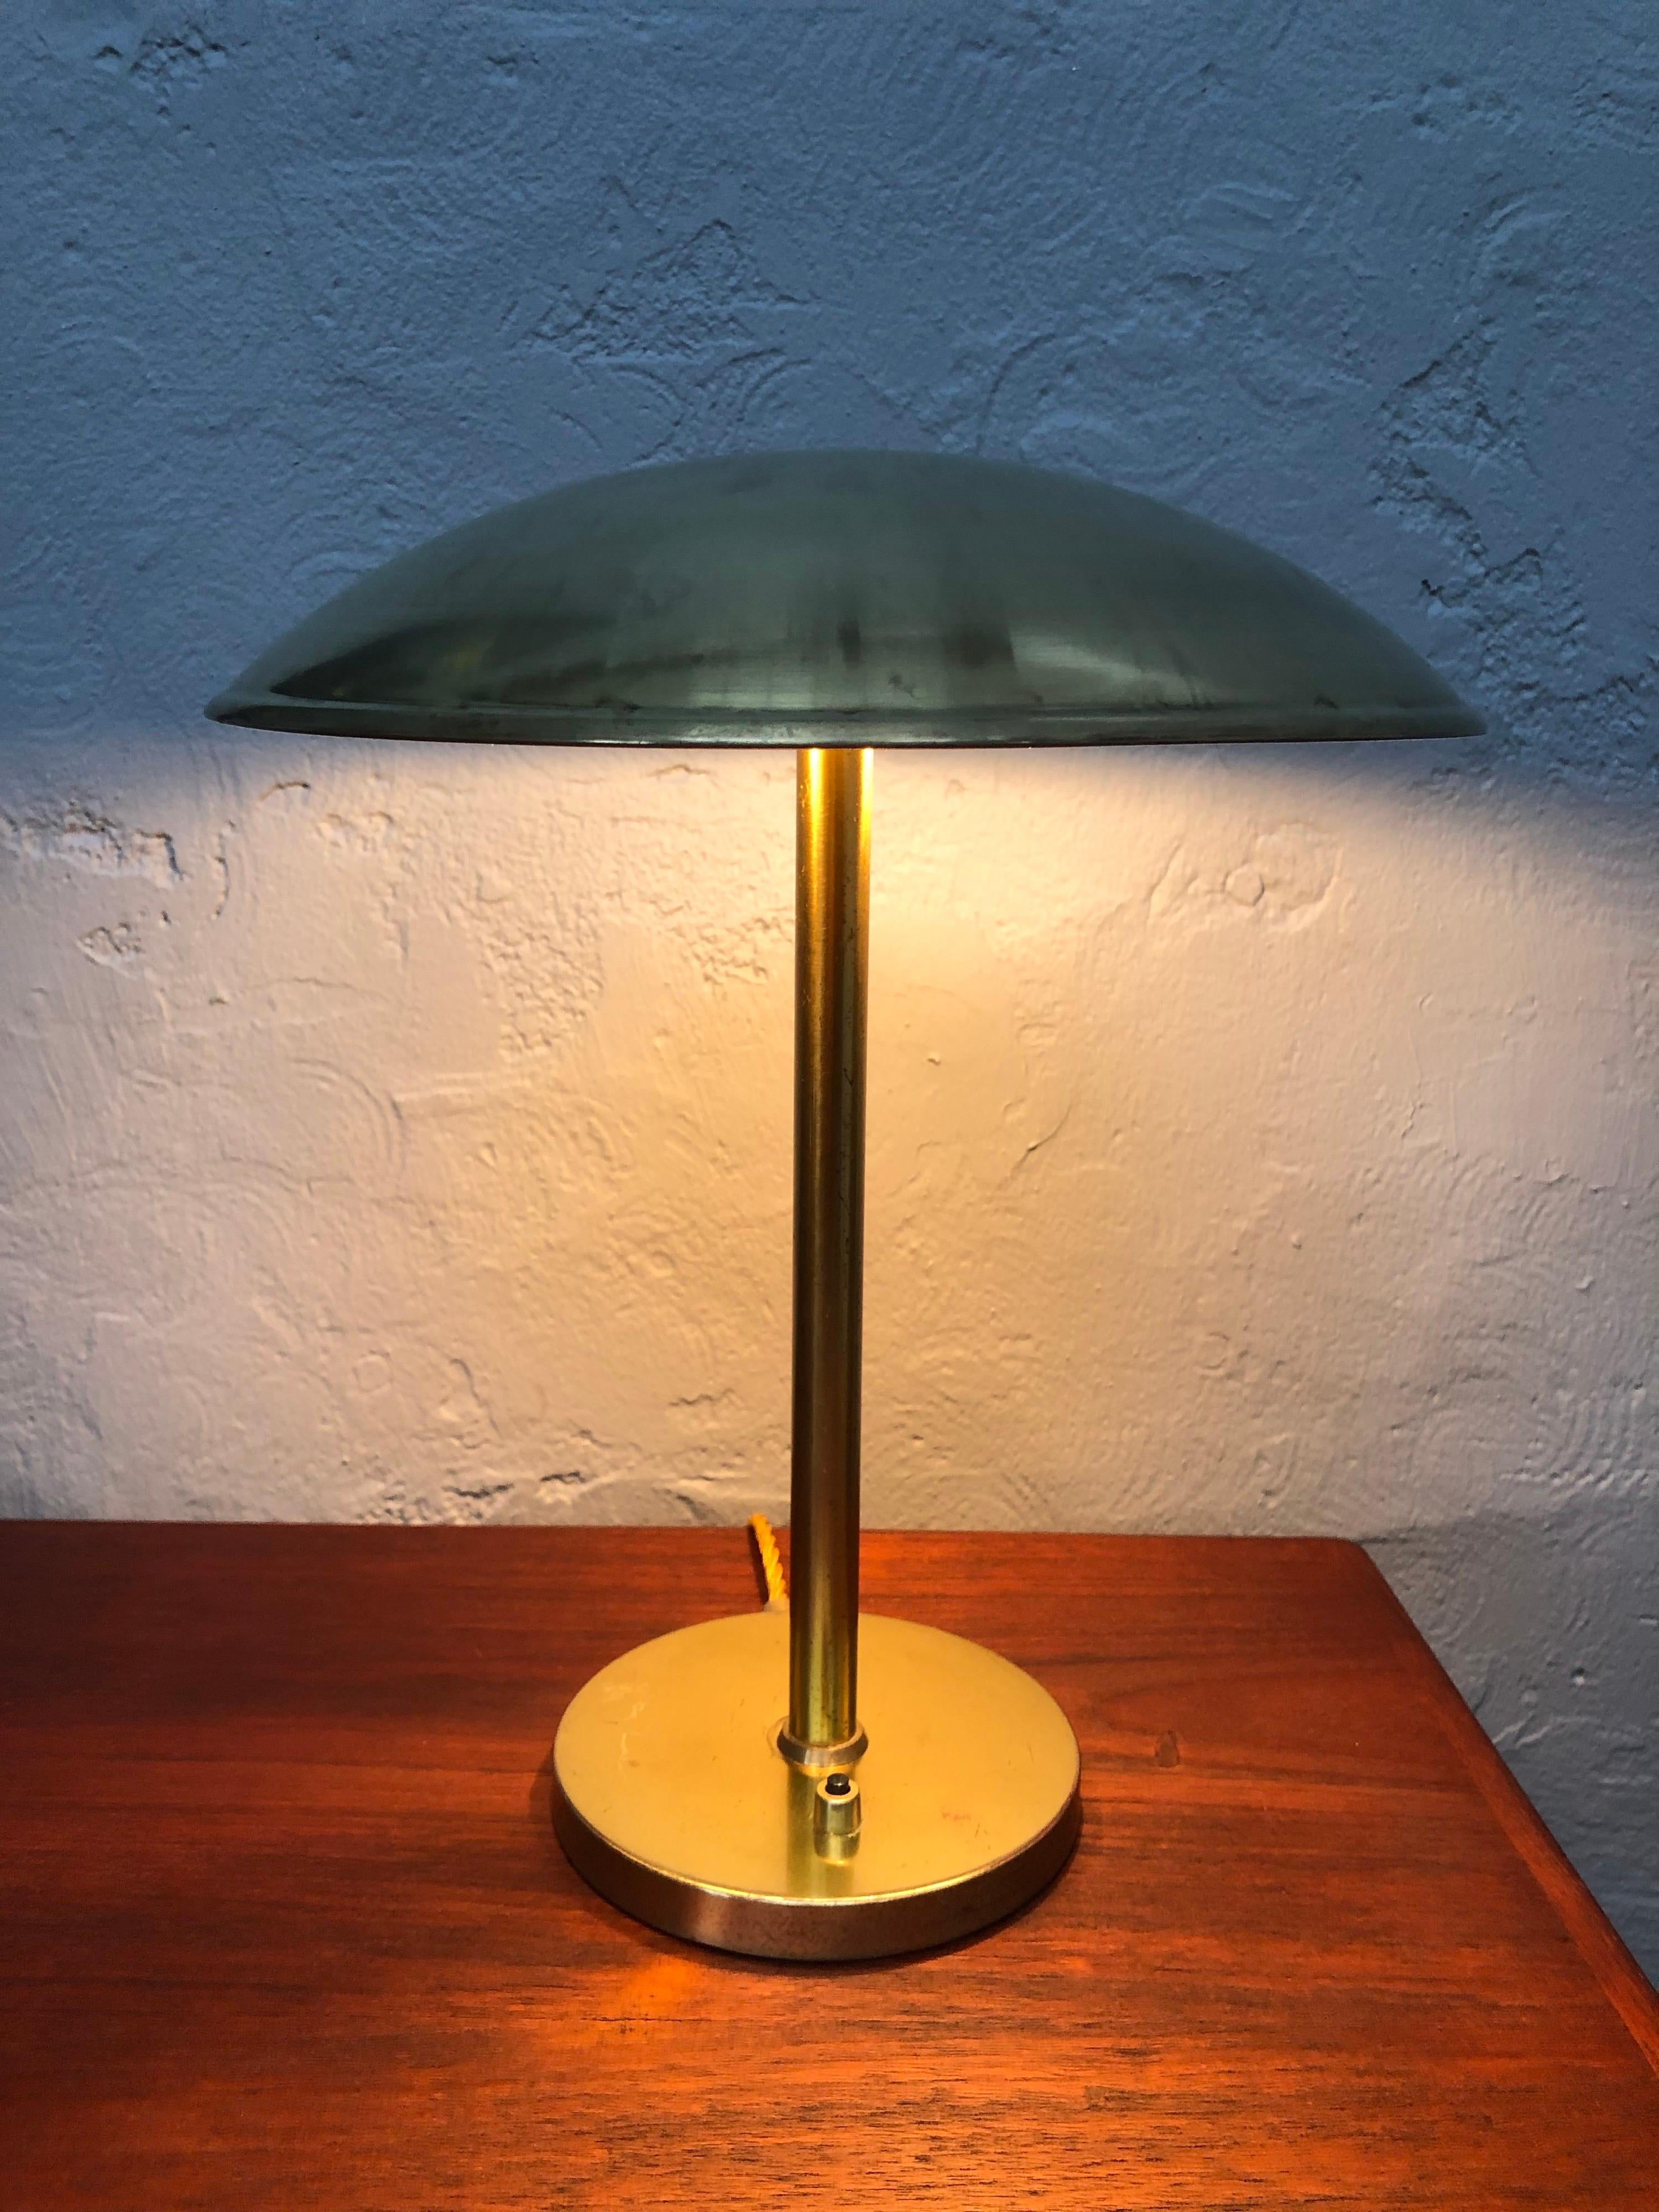 A Danish modernist table lamp in brass by Lyfa of Denmark. 
The designer is unknown but could be Bent Karlby as he started designing for Lyfa in the 1940s.
The provenance is Eastern Court House Bernstorffs Palace Copenhagen.
It is very likely that